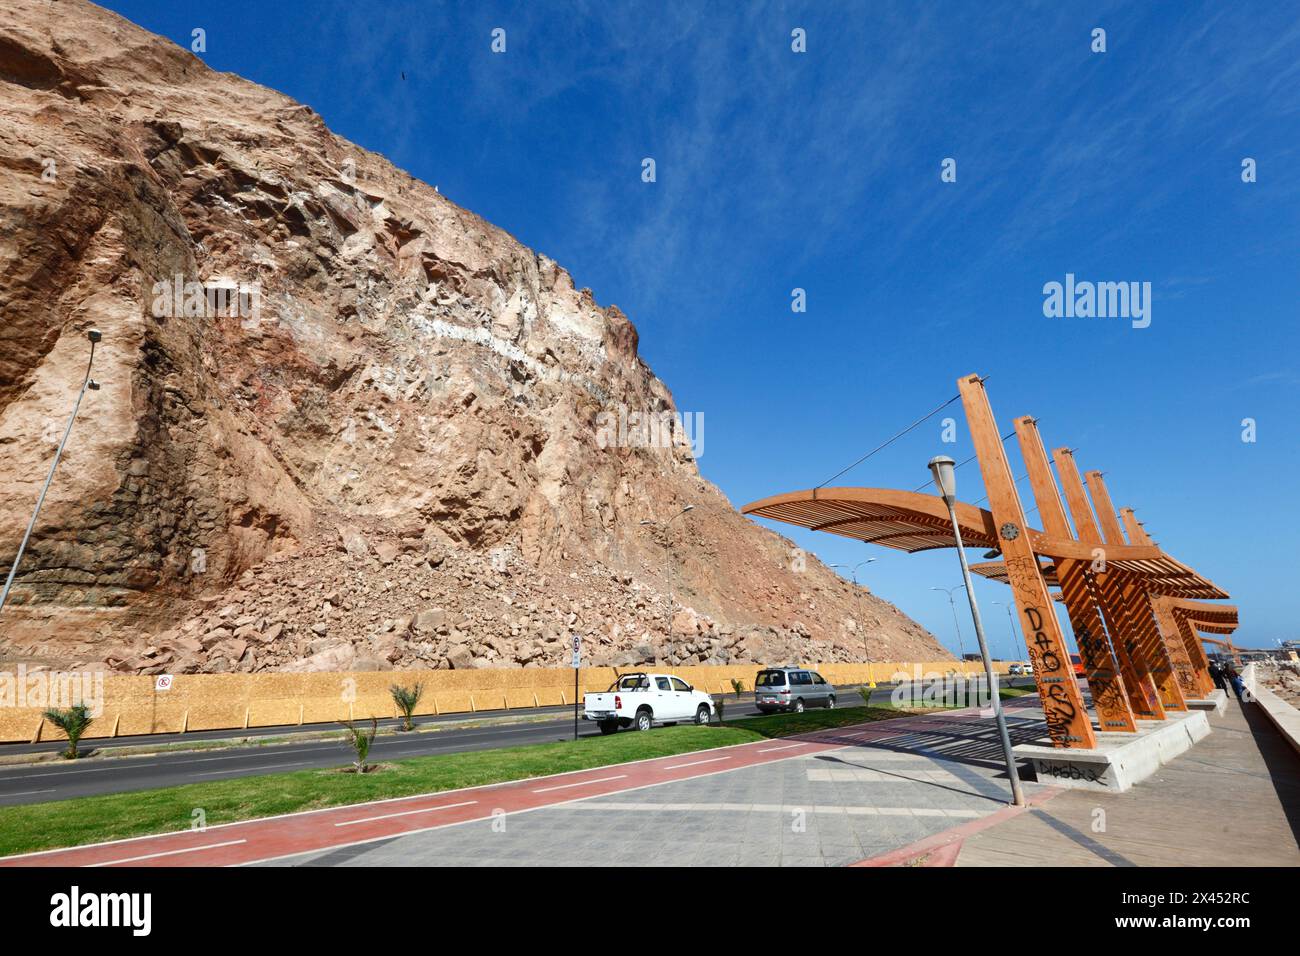 Wide angle view of wooden bus shelter and vehicles parked on Av Costanera / Av. Comandante San Martín below cliffs of El Morro headland, Arica, Chile Stock Photo